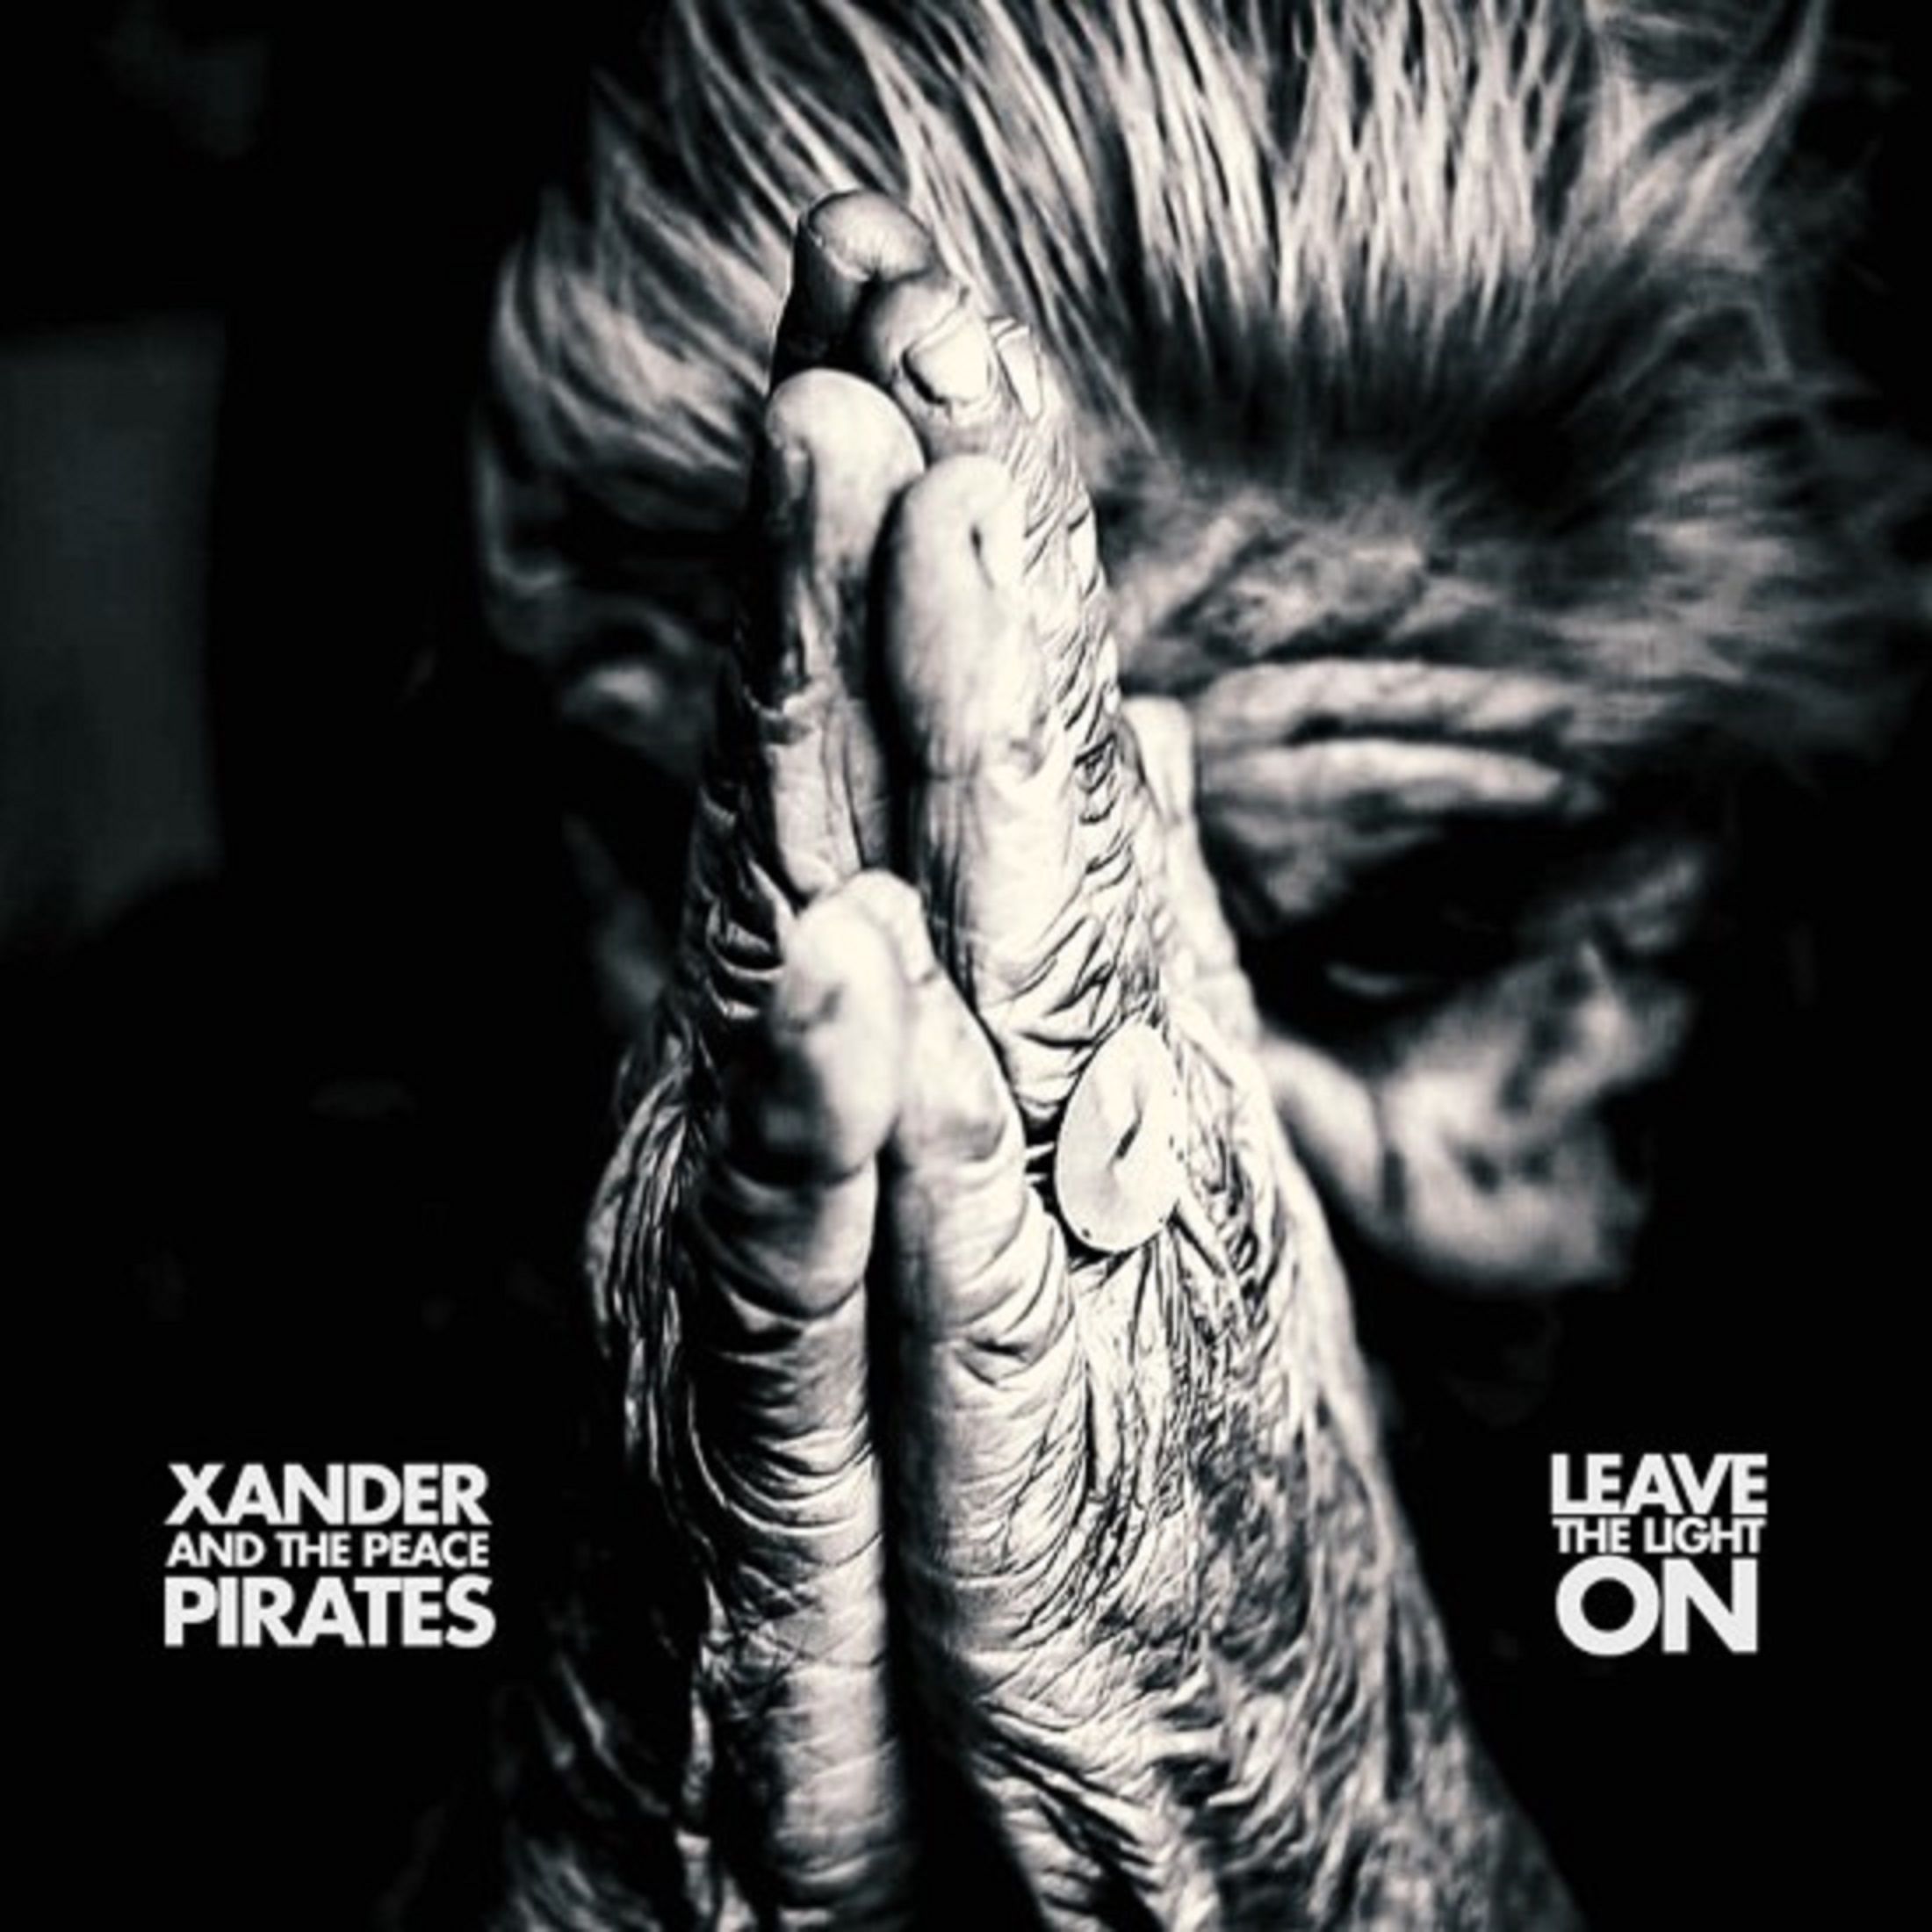 Xander and the Peace Pirates release single "Leave The Light On"